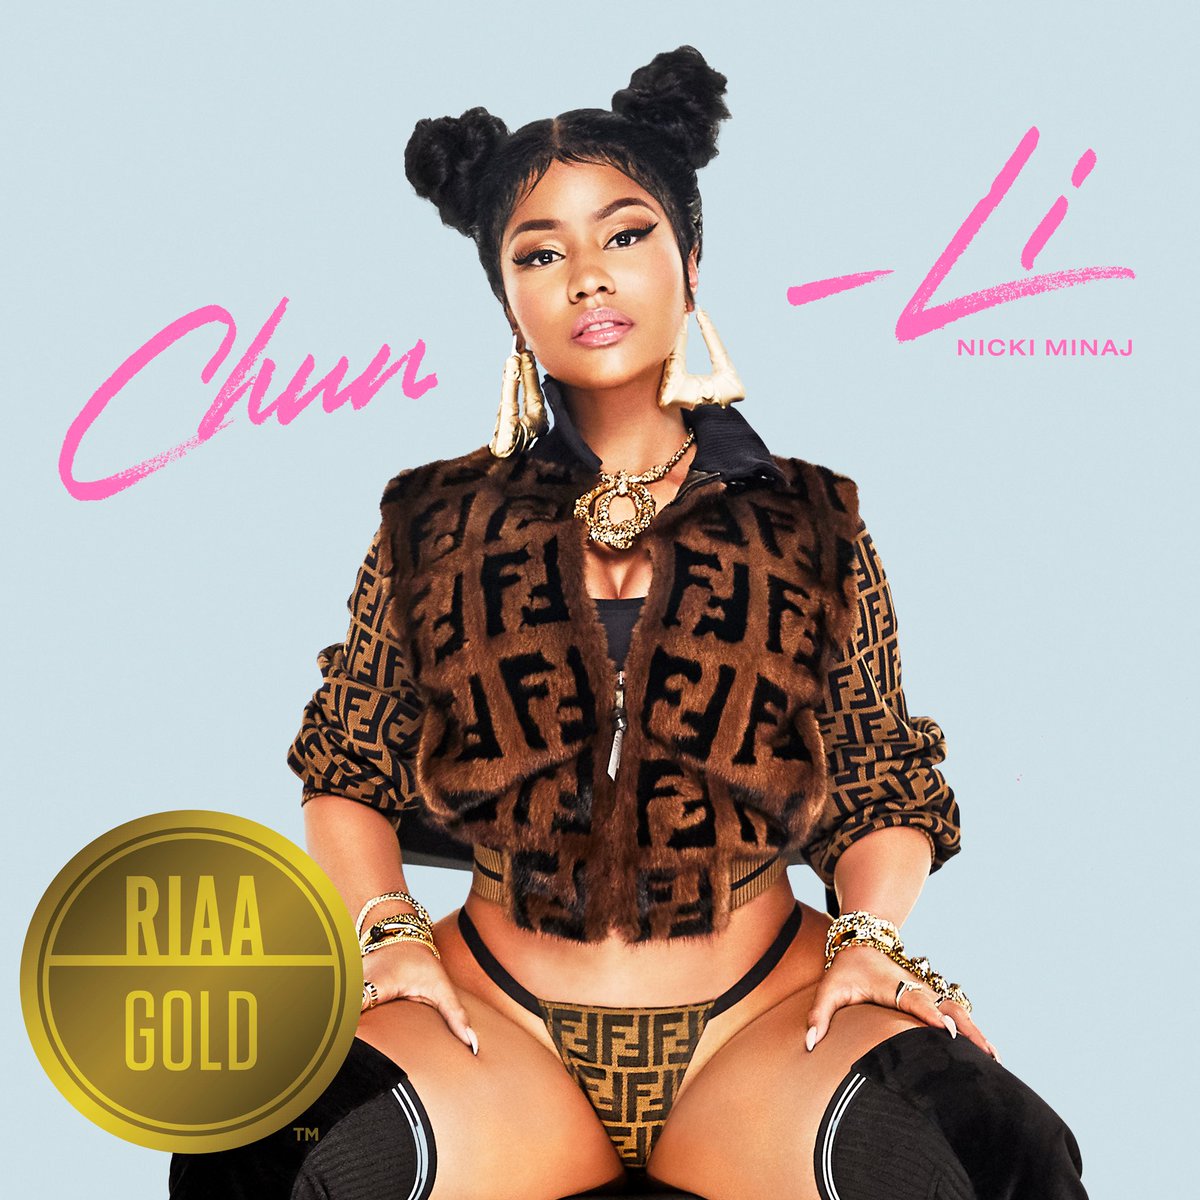 Chun-Li has been certified GOLD. Thank you to everyone for your support. ???????? #Queen 8|10|18 https://t.co/7SVLNKyqmj